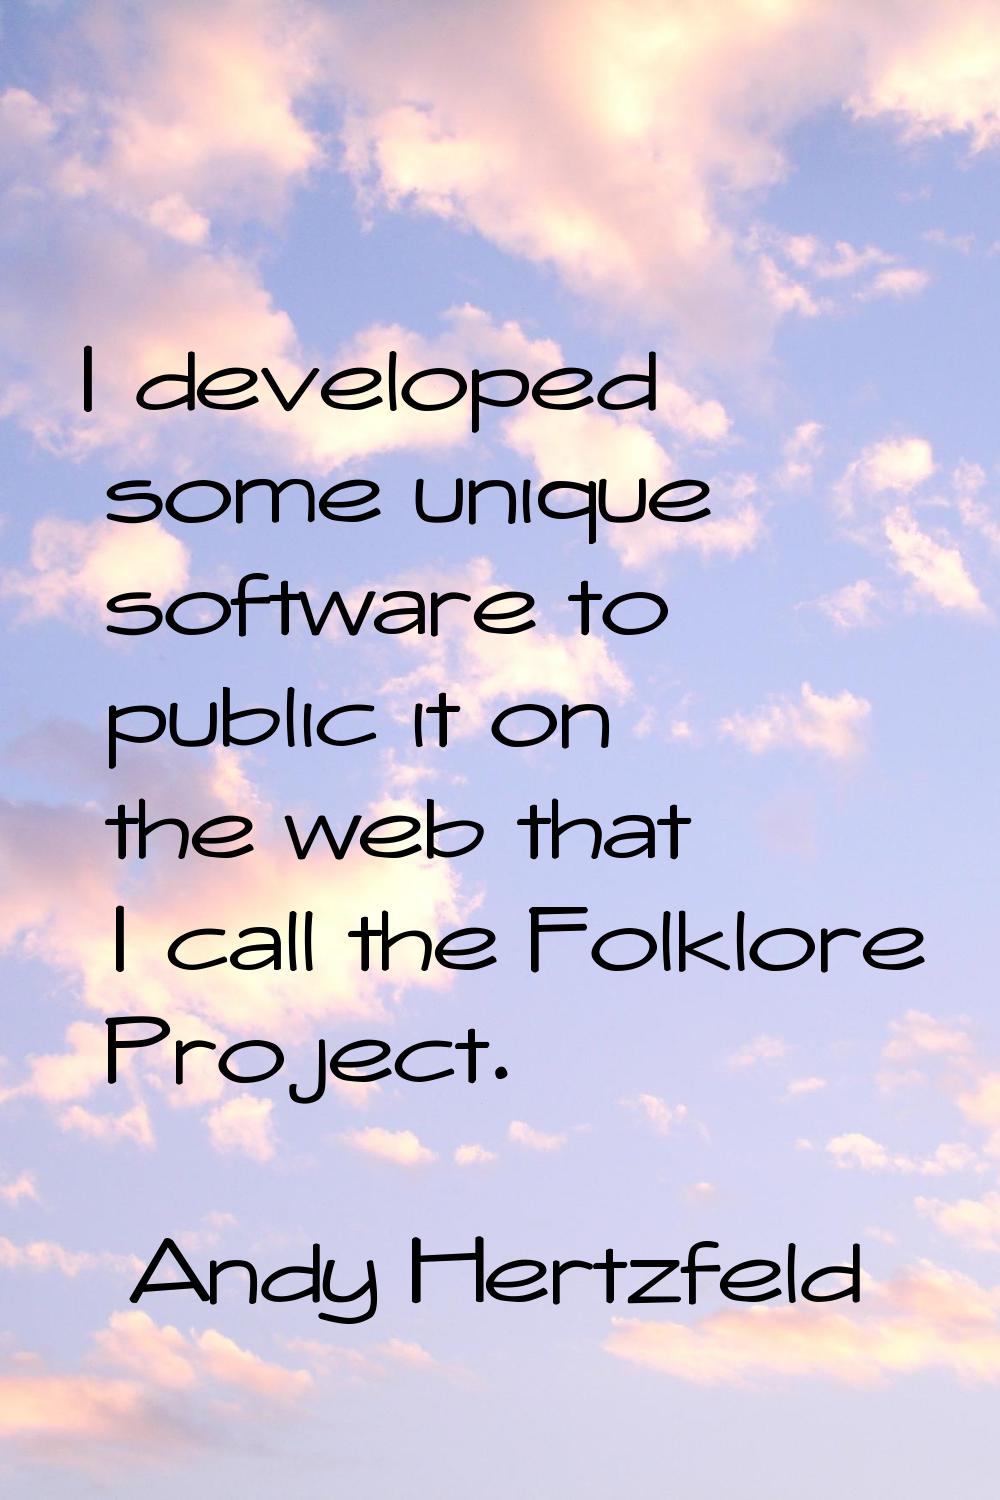 I developed some unique software to public it on the web that I call the Folklore Project.